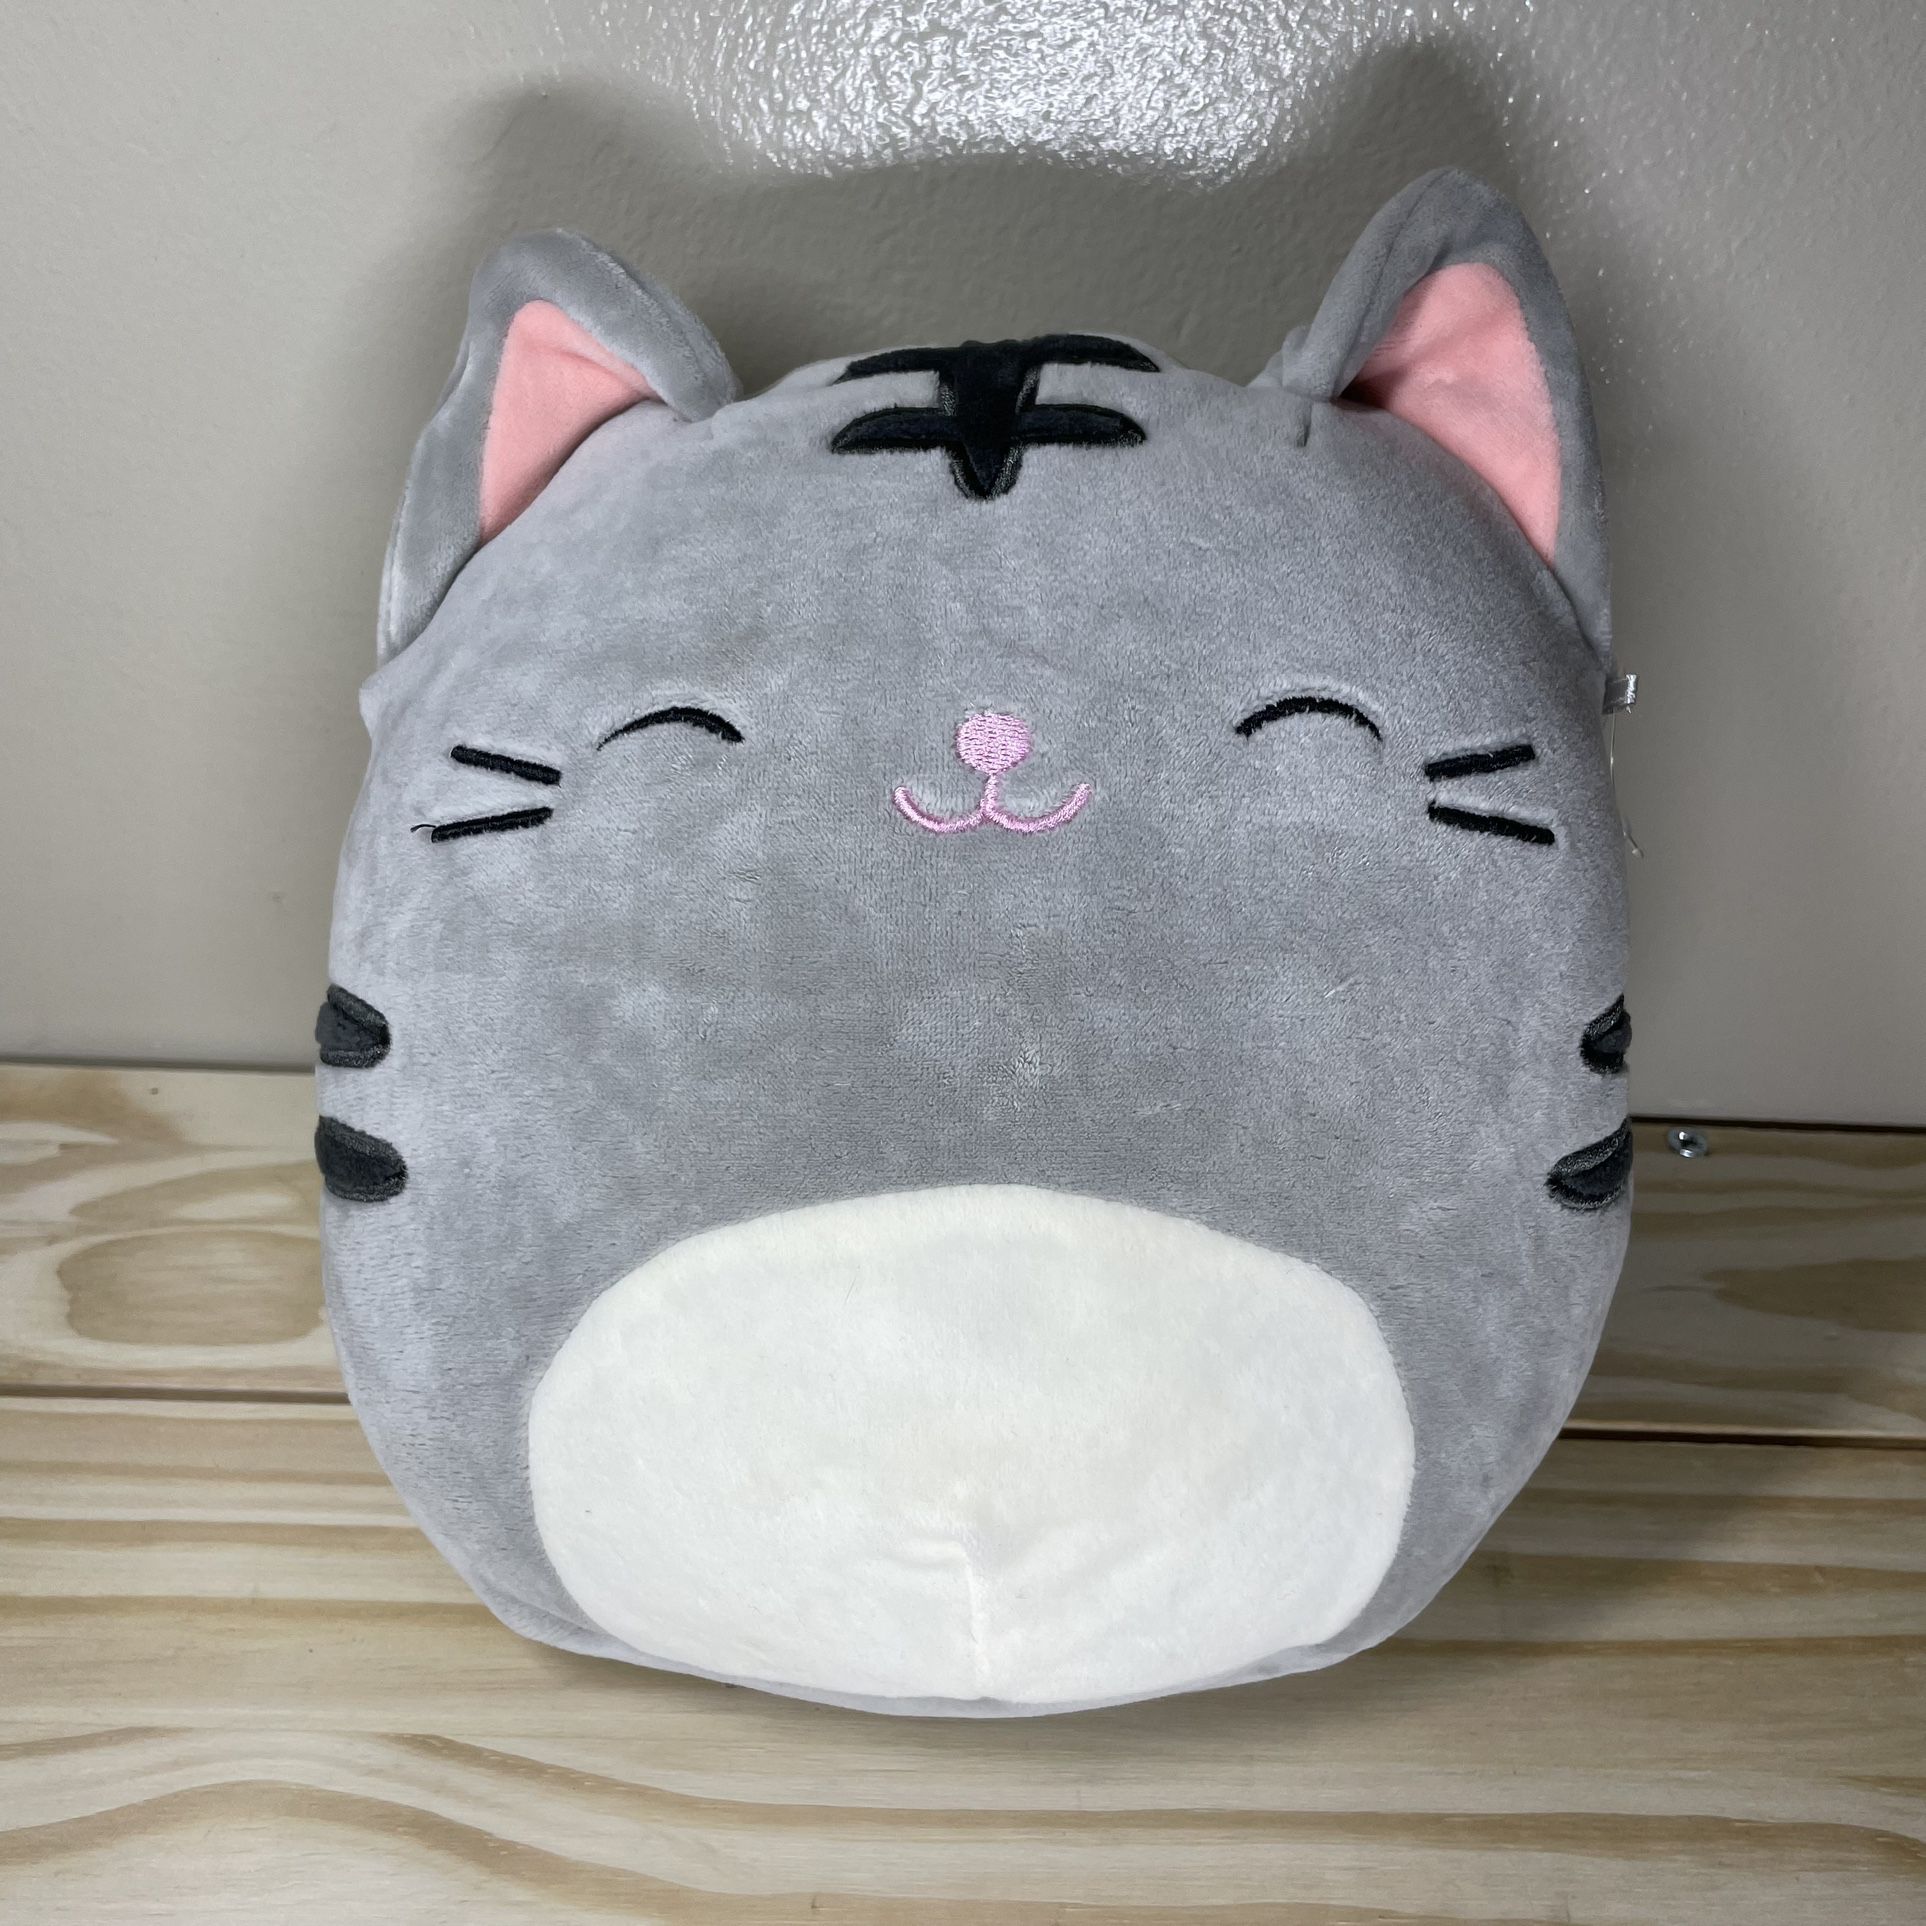 Squishmallows 8” Tally Tabby Cat Kitten Smiling Gray Plush Toy Stuffed Animal.   Check out my other cool listings!!!  (: I might have other items like